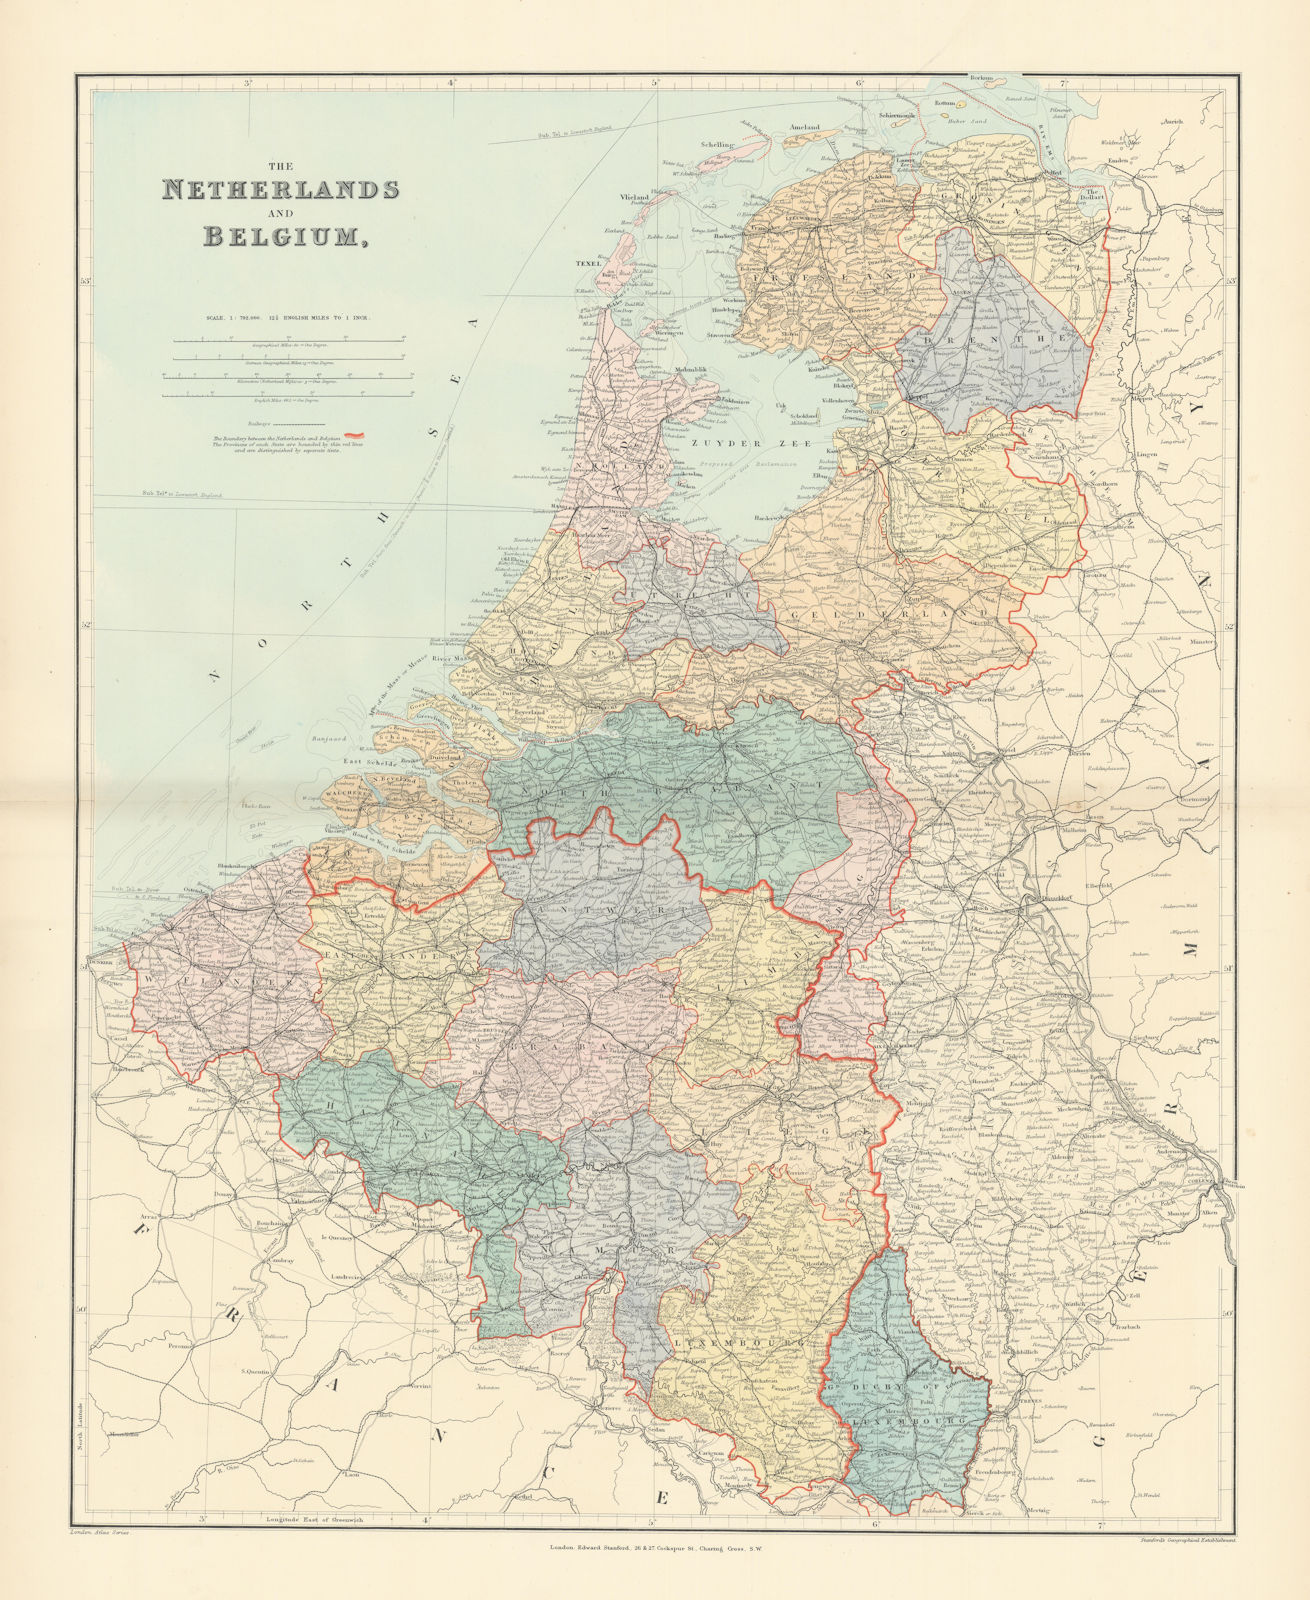 Netherlands & Belgium. Benelux. Projected Great Dyke. 68x54cm. STANFORD 1896 map